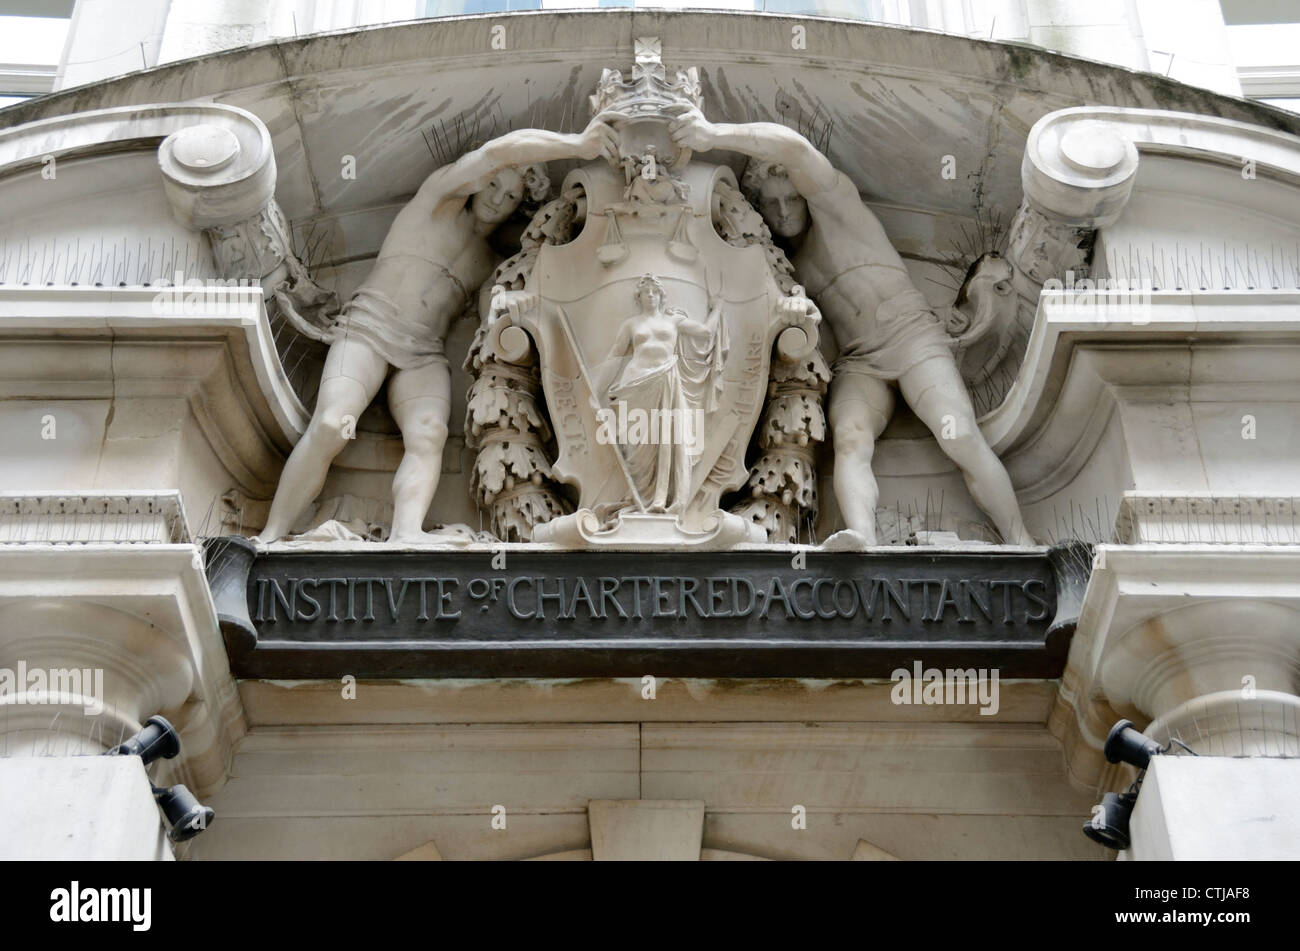 Institute of Chartered Accountants Zeichen und Emblem oberhalb des Chartered Accountants Hall in Moorgate Place, London, UK Stockfoto